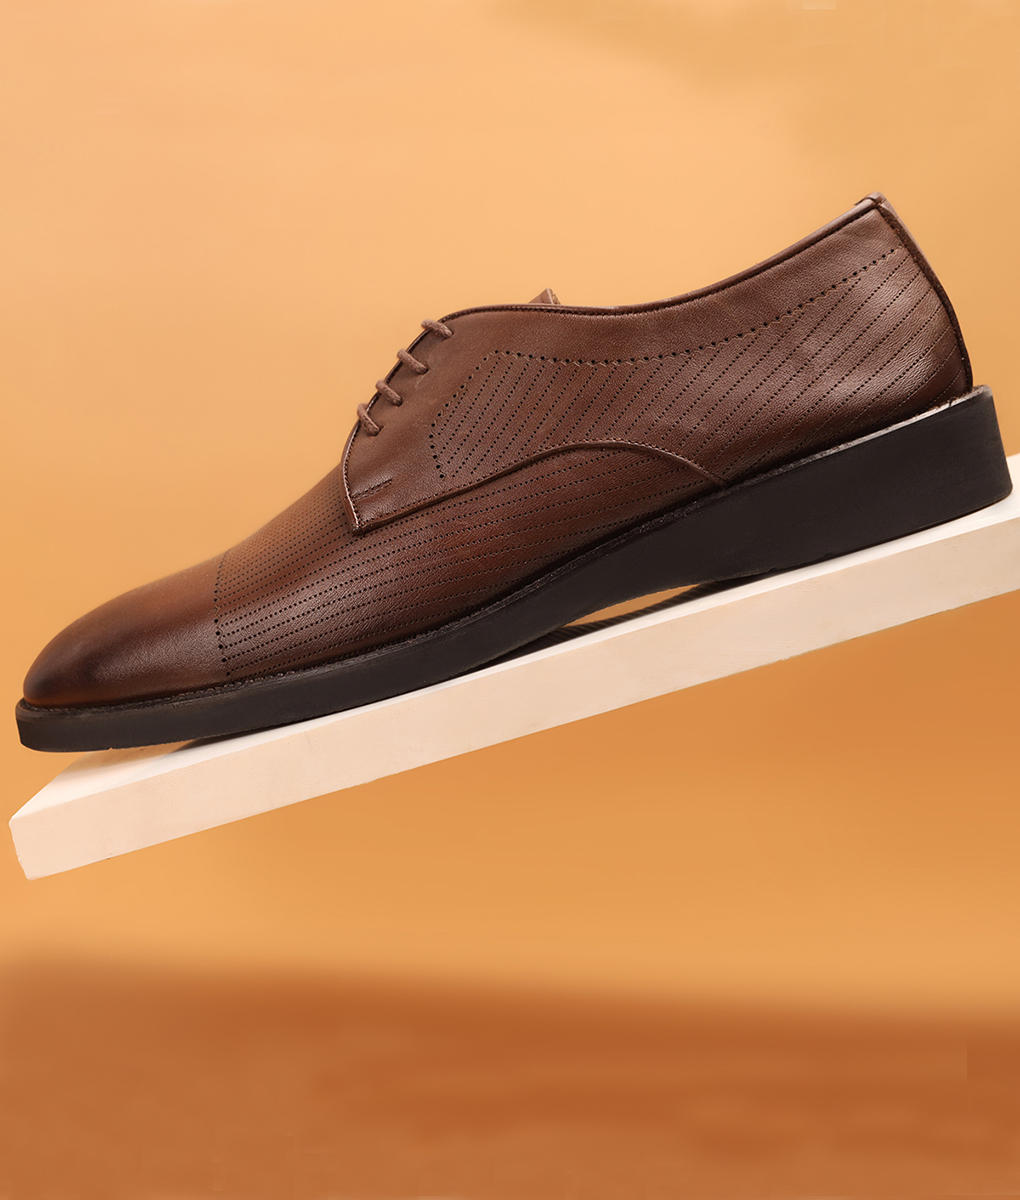 Men's Turkey Made Formal Brown Leather Shoes